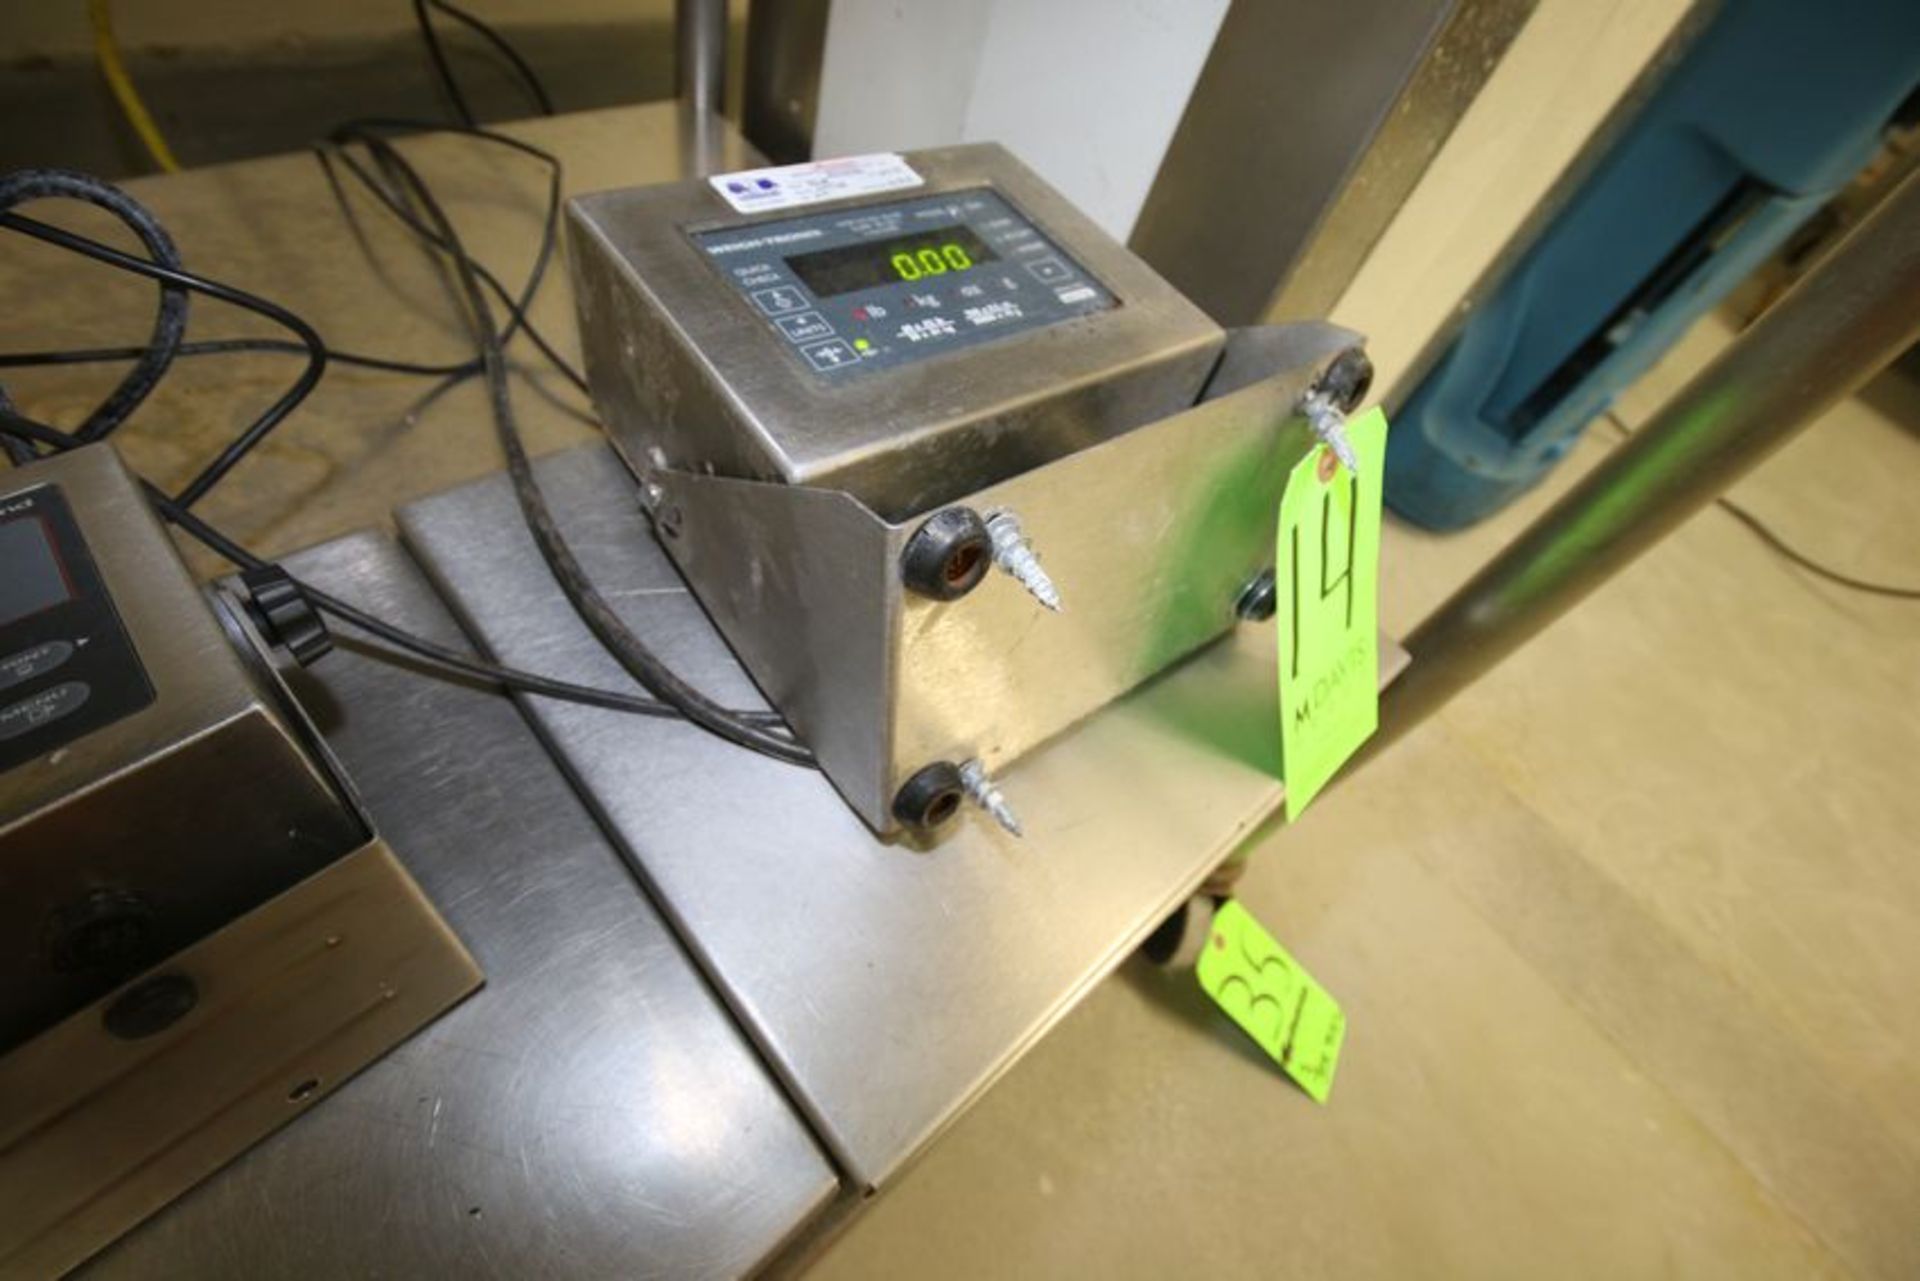 Digital Platform Scales - (1) Weigh-Tronix Model QC-3265, S/N 04178 and Rice Lake Model 480-2A, S/ - Image 2 of 2